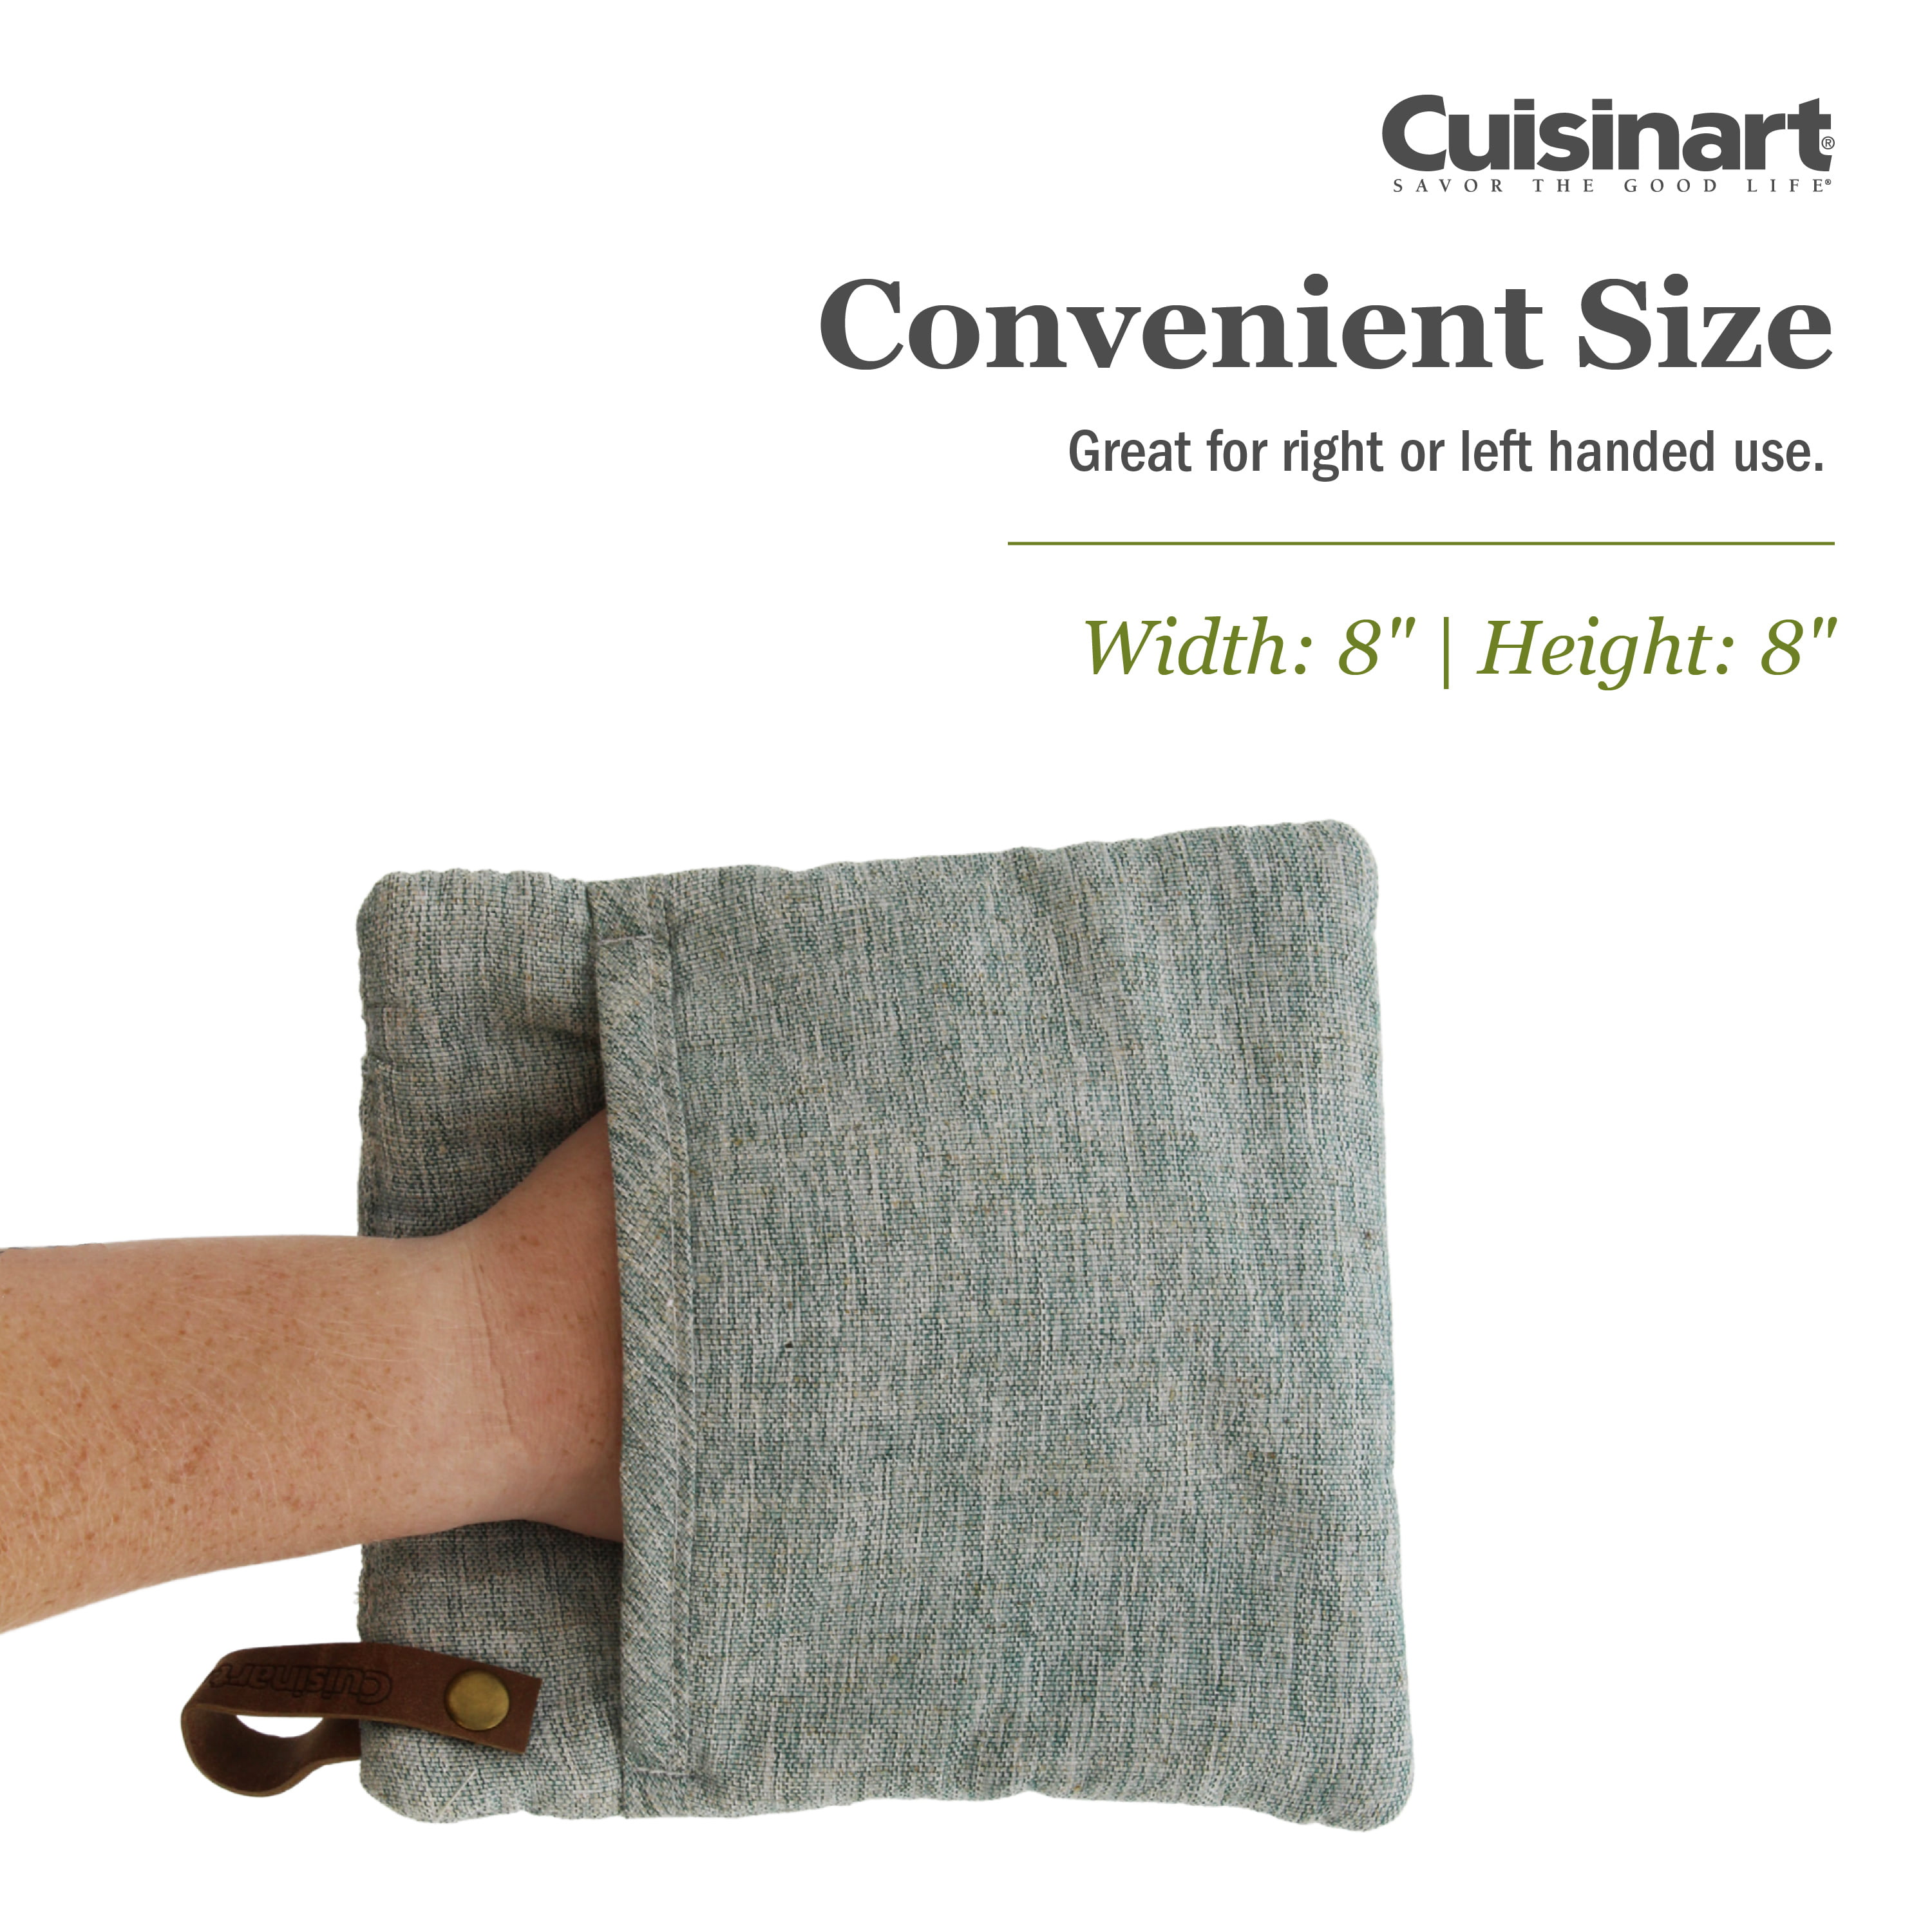 Cuisinart Chambray Neoprene Mini Oven Mitts, 2pk Non-Slip Grip, Faux  Leather Loop - Ideal Set for Handling Hot Cookware, Bakeware- Gray 